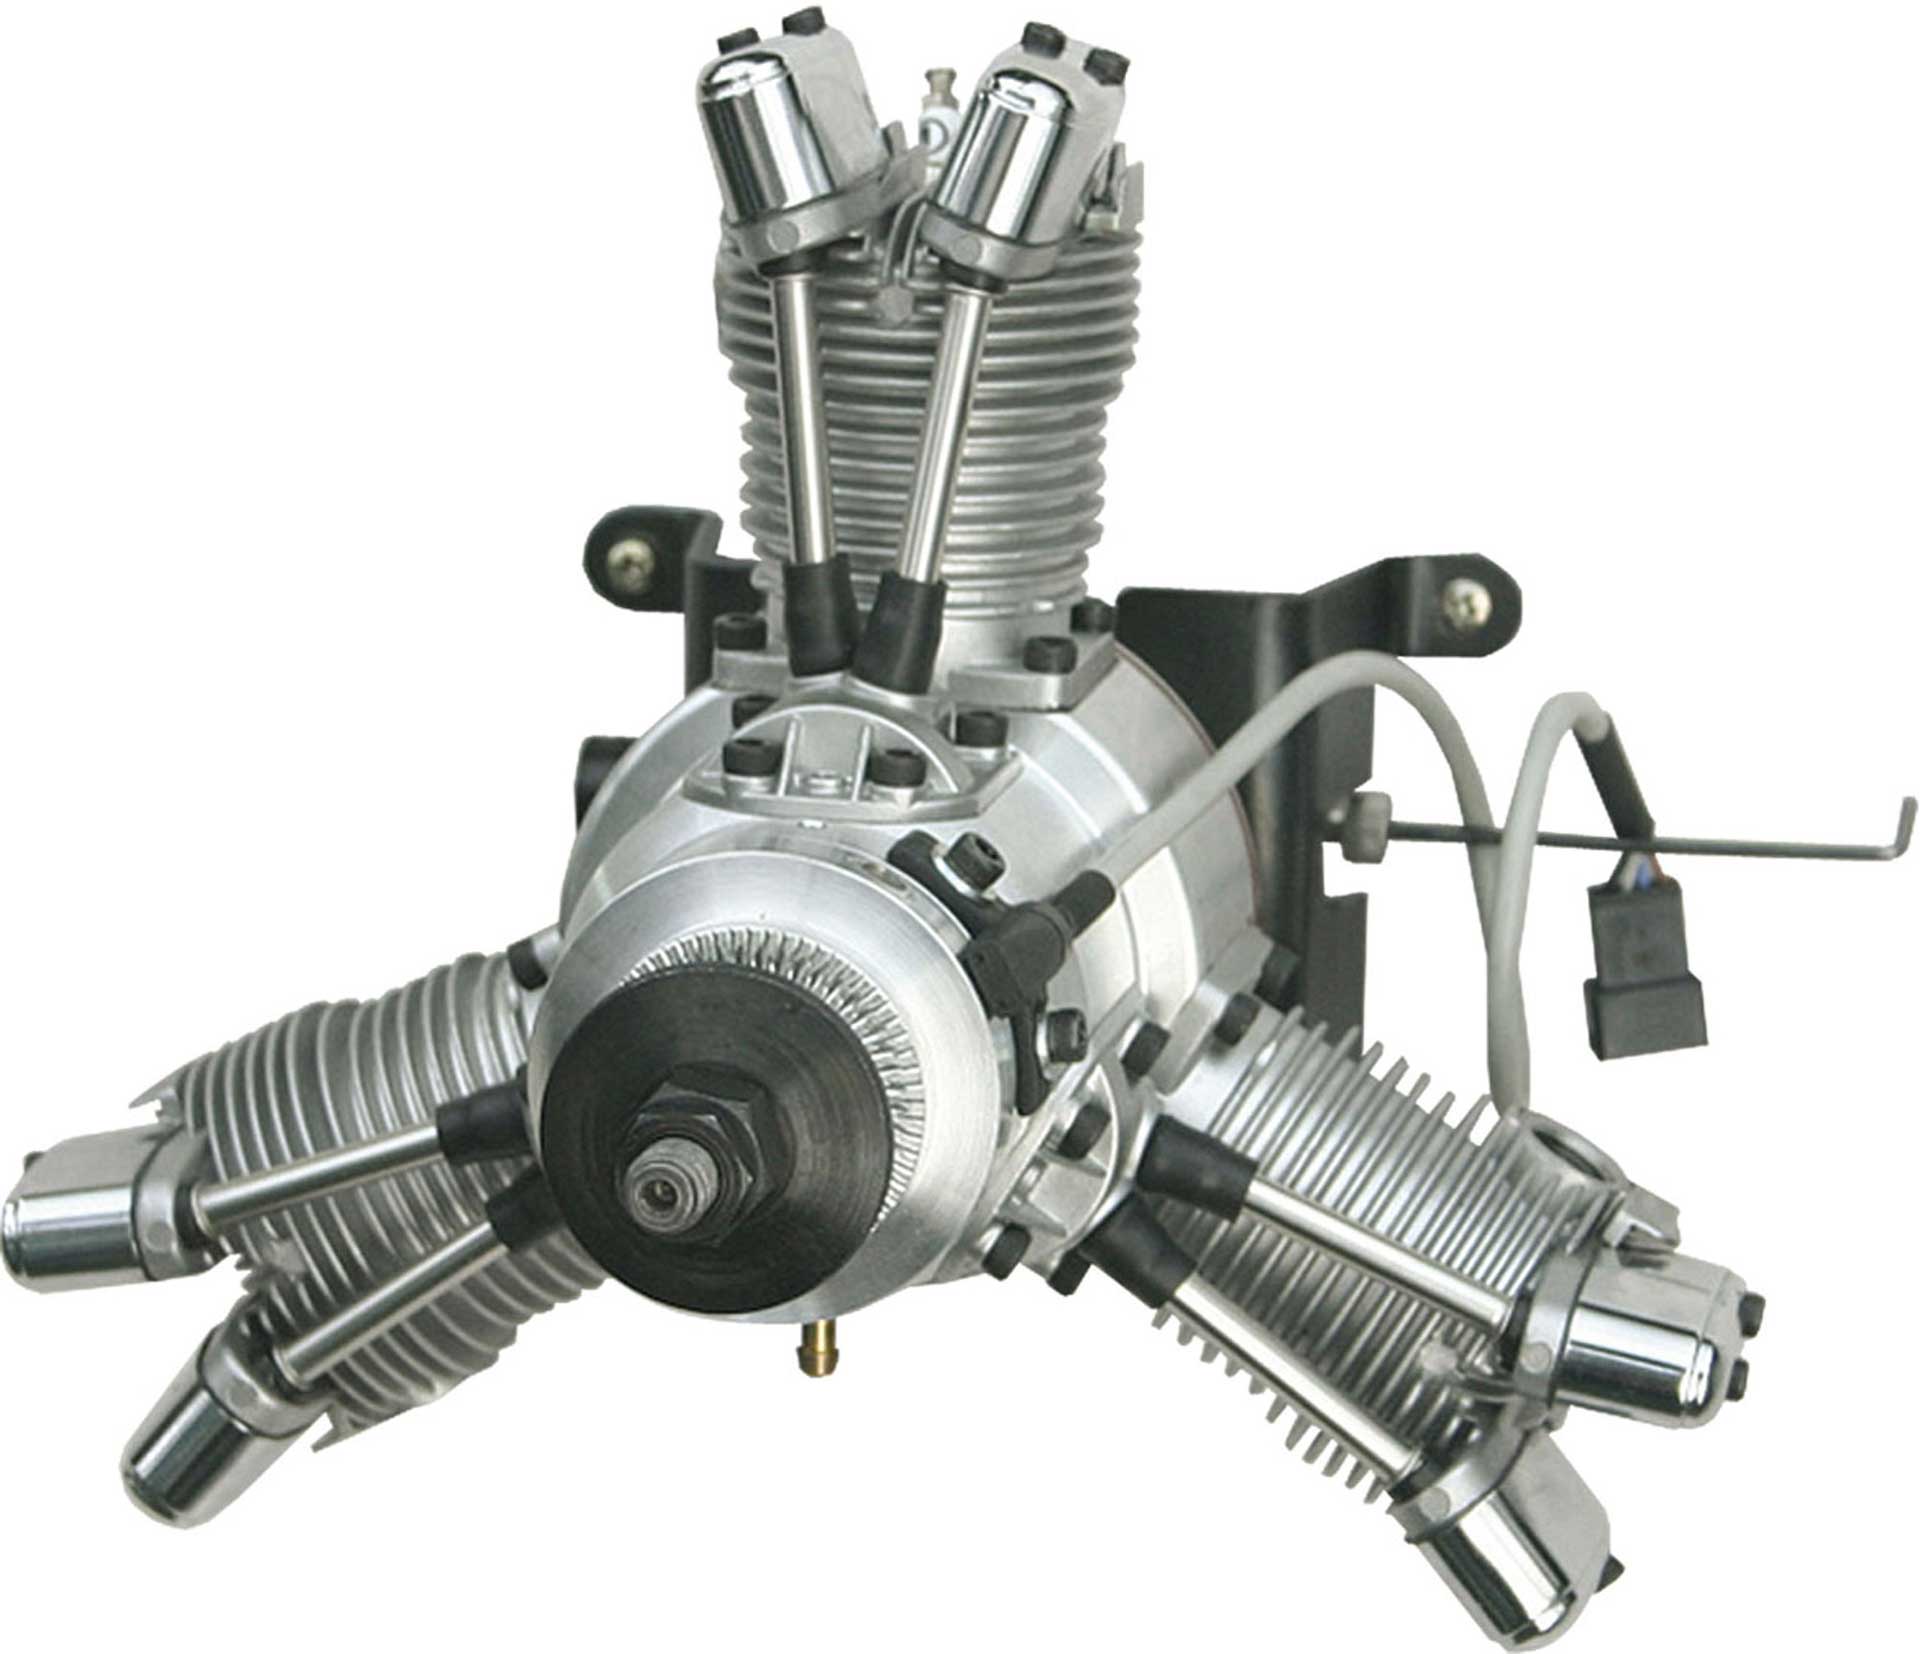 SAITO FG-33R3 GAS ENGINE 3-CYLINDER RADIAL ENGINE WITH ELECTRONIC IGNITION